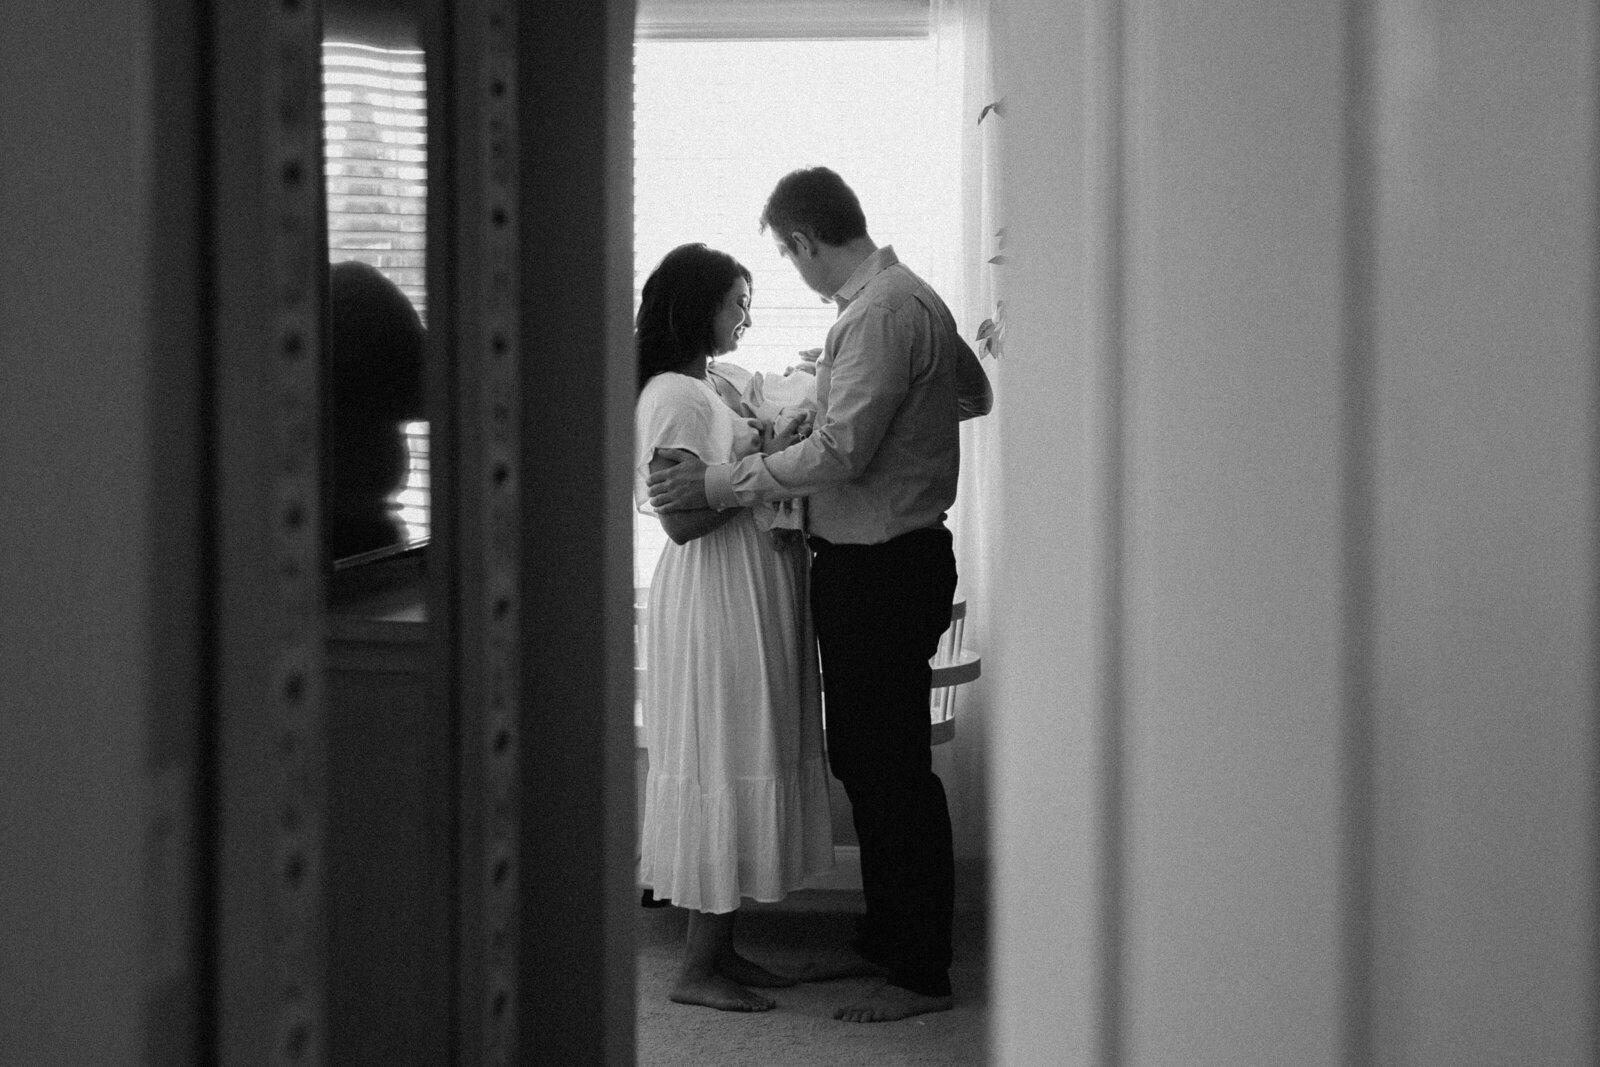 A mom and dad stand close while looking down at their newborn son